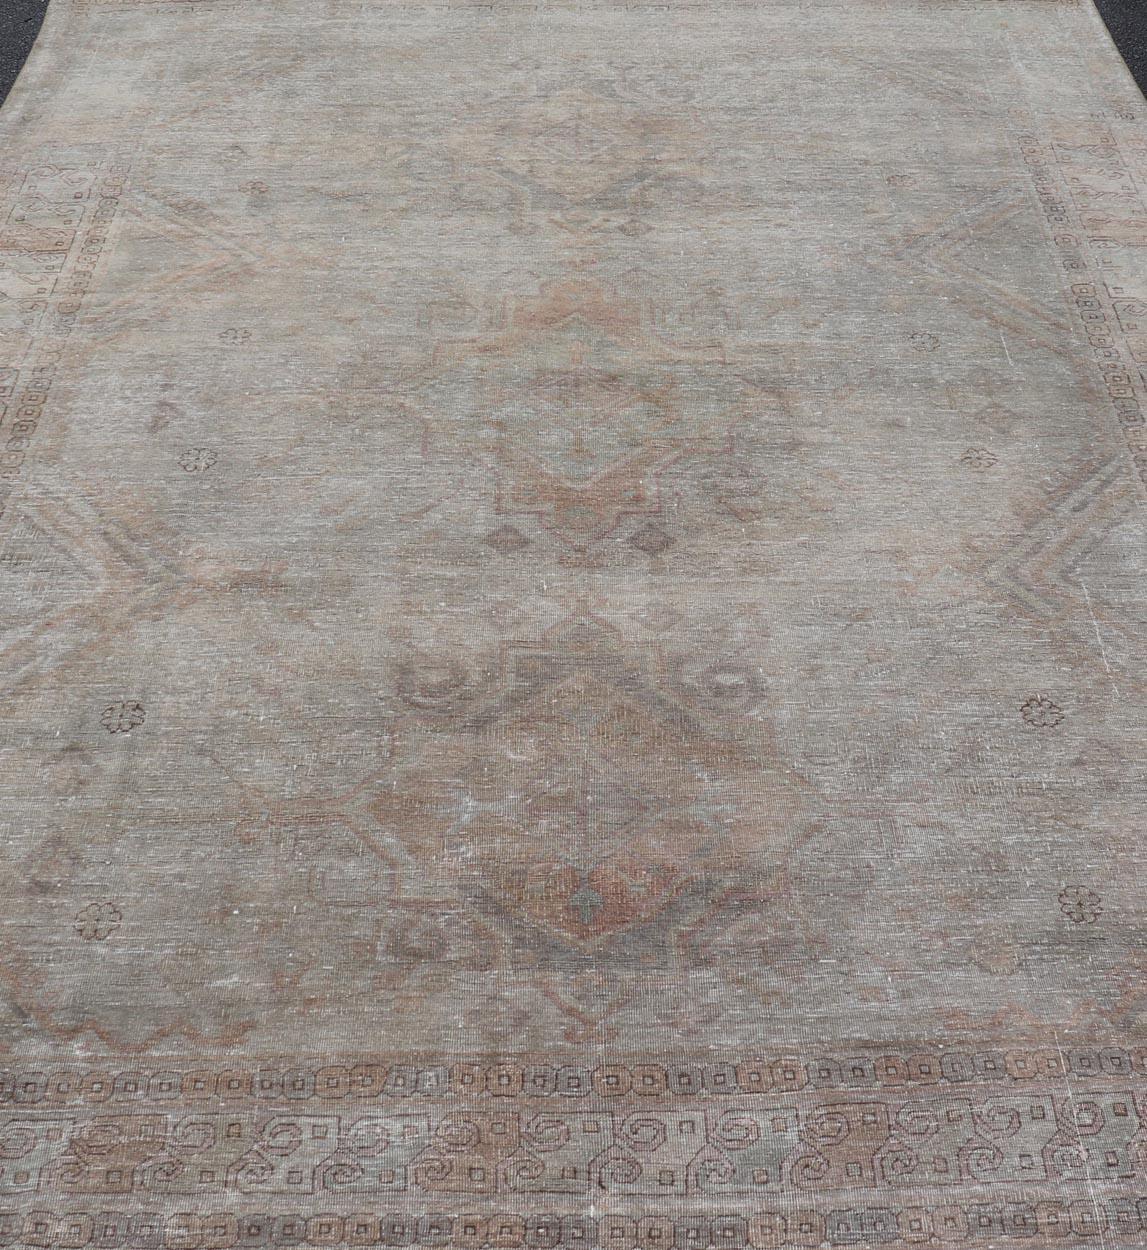 Antique Khotan Rug in Medallions with Silvery Background and Muted Colors. Keivan Woven Arts / rug EN-179399, country of origin / type: Turkestan / Khotan, 1900
Measures: 8'0 x 10'6 
This attractive Khotan rug is a spectacular testament to the